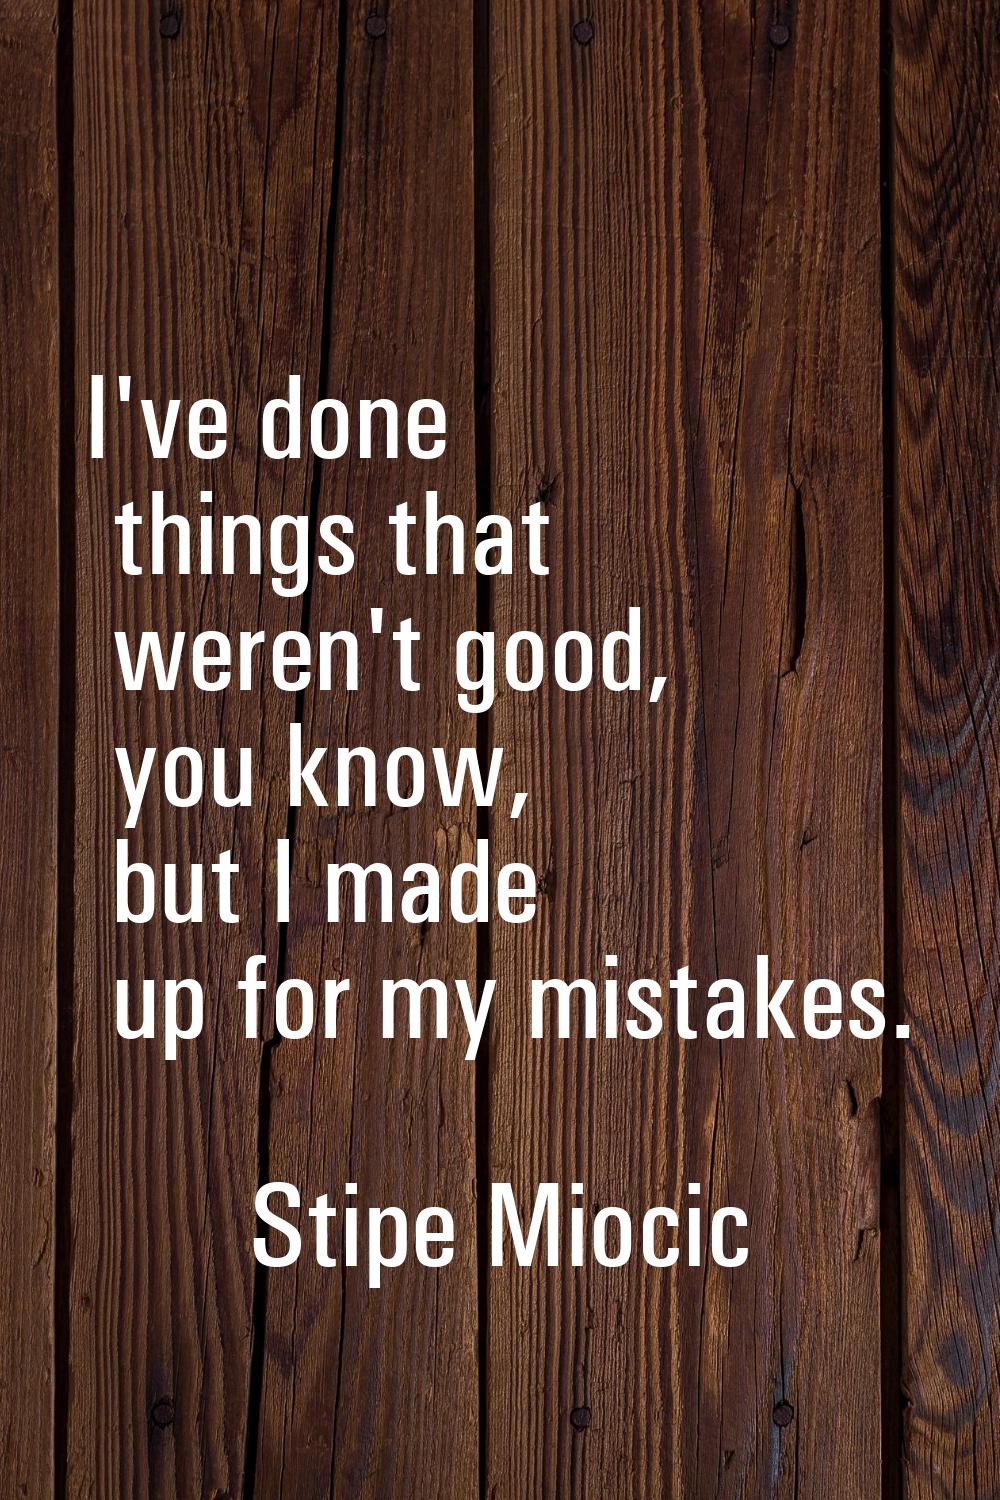 I've done things that weren't good, you know, but I made up for my mistakes.